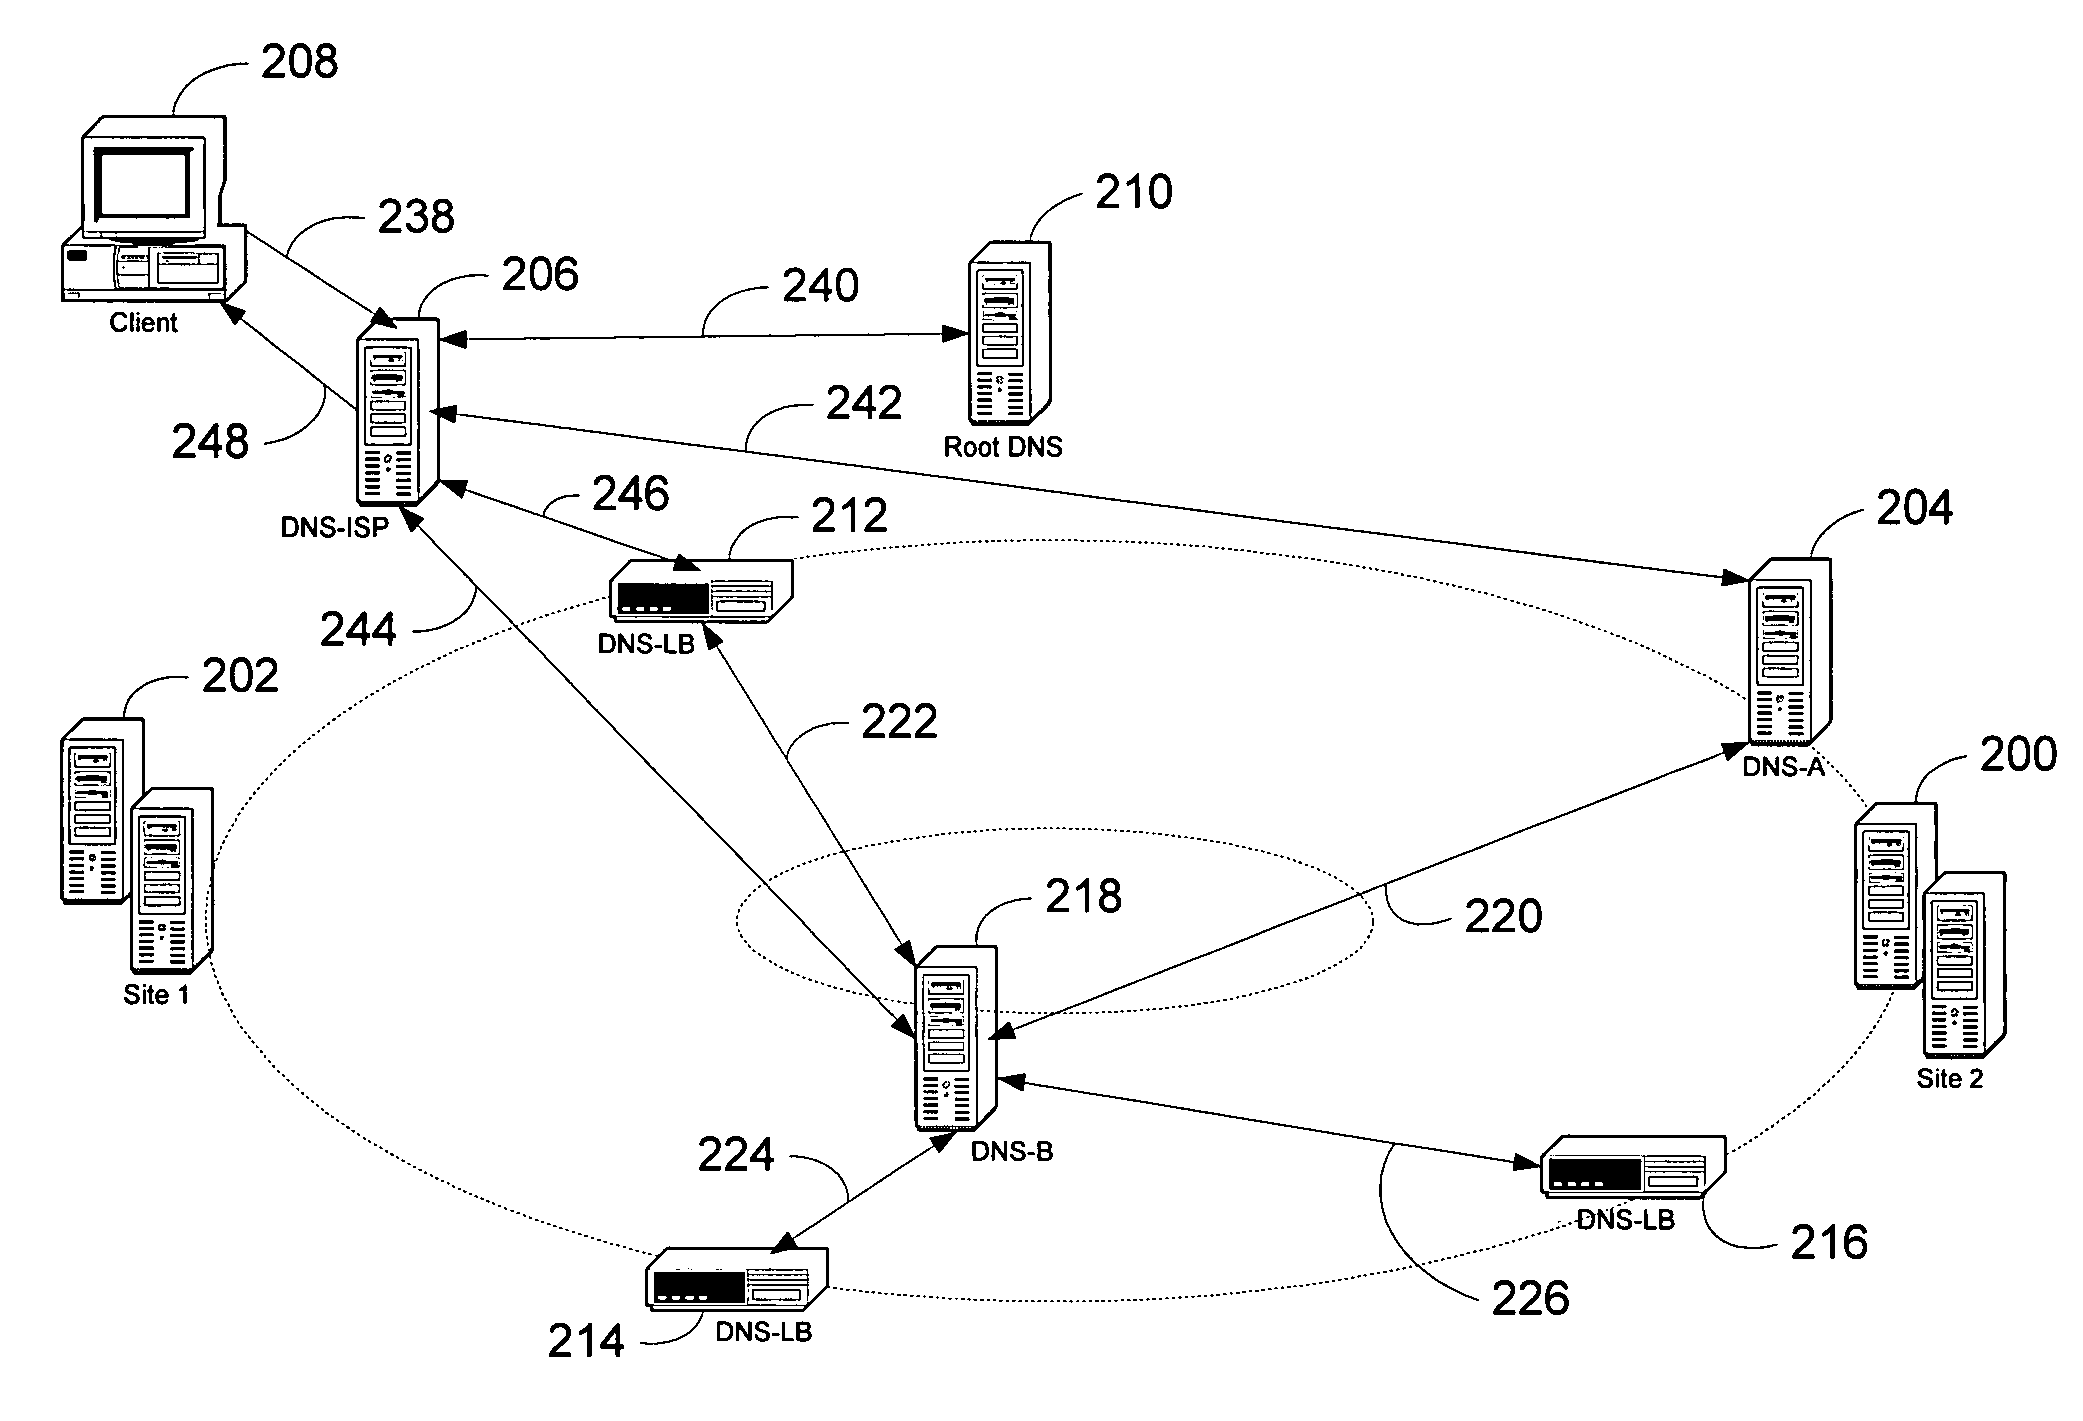 System and method for performing client-centric load balancing of multiple globally-dispersed servers